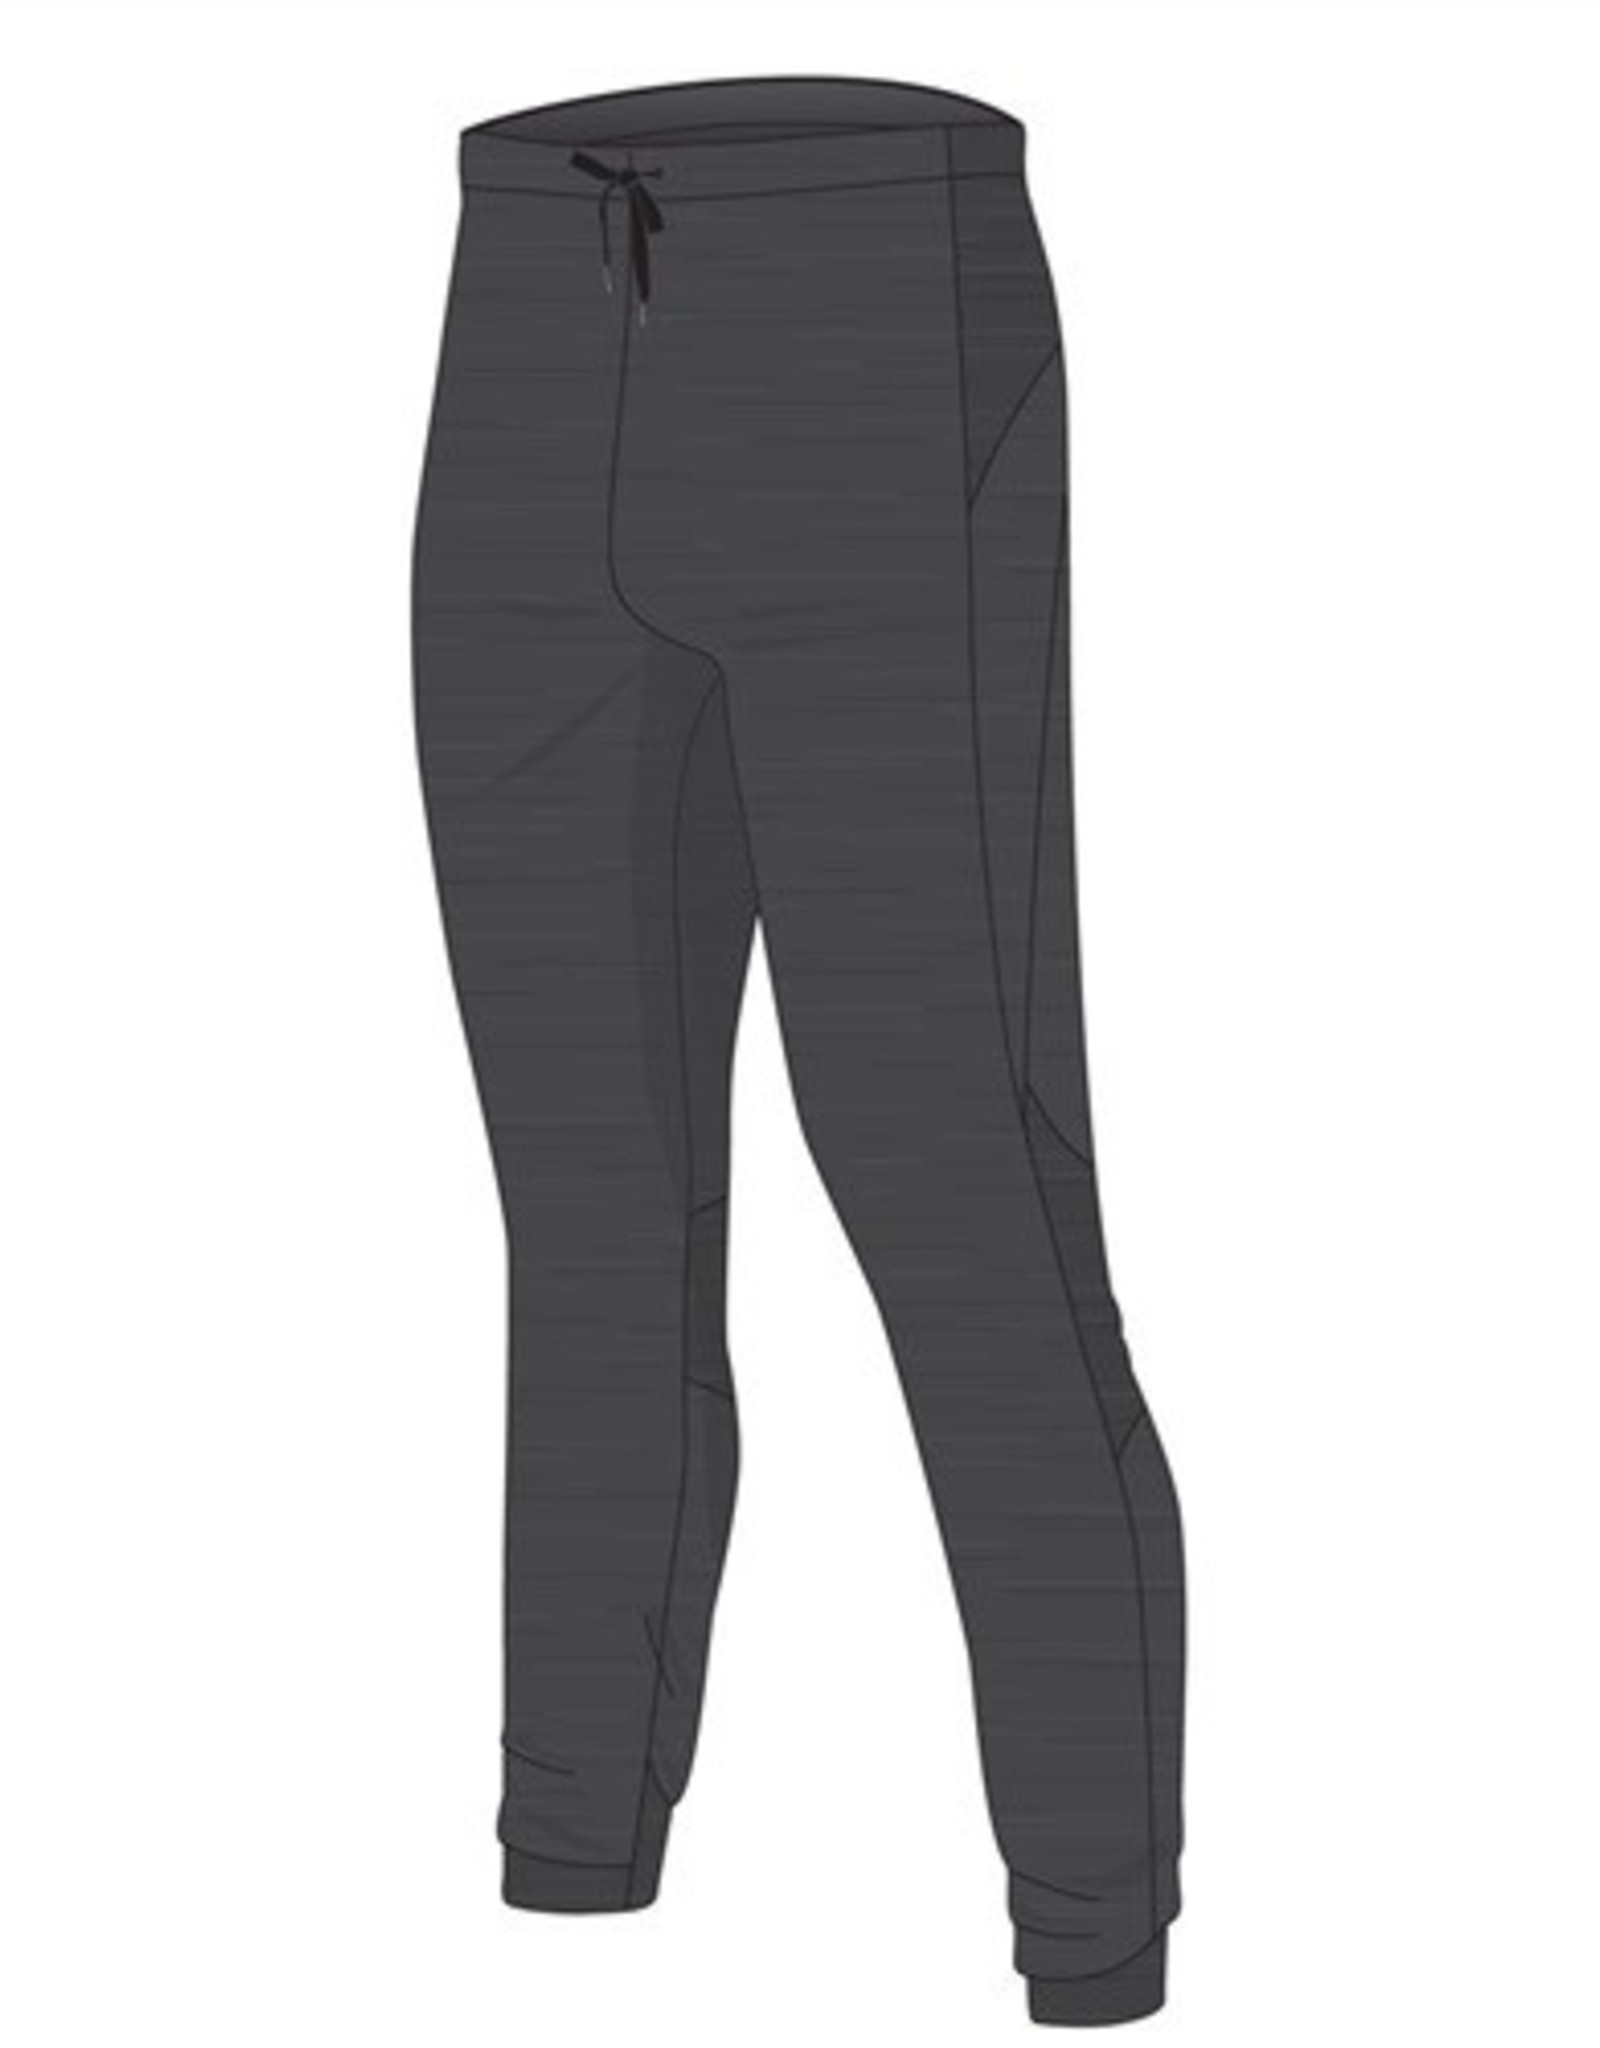 NRS W's H2 Core Expedition Weight Pant